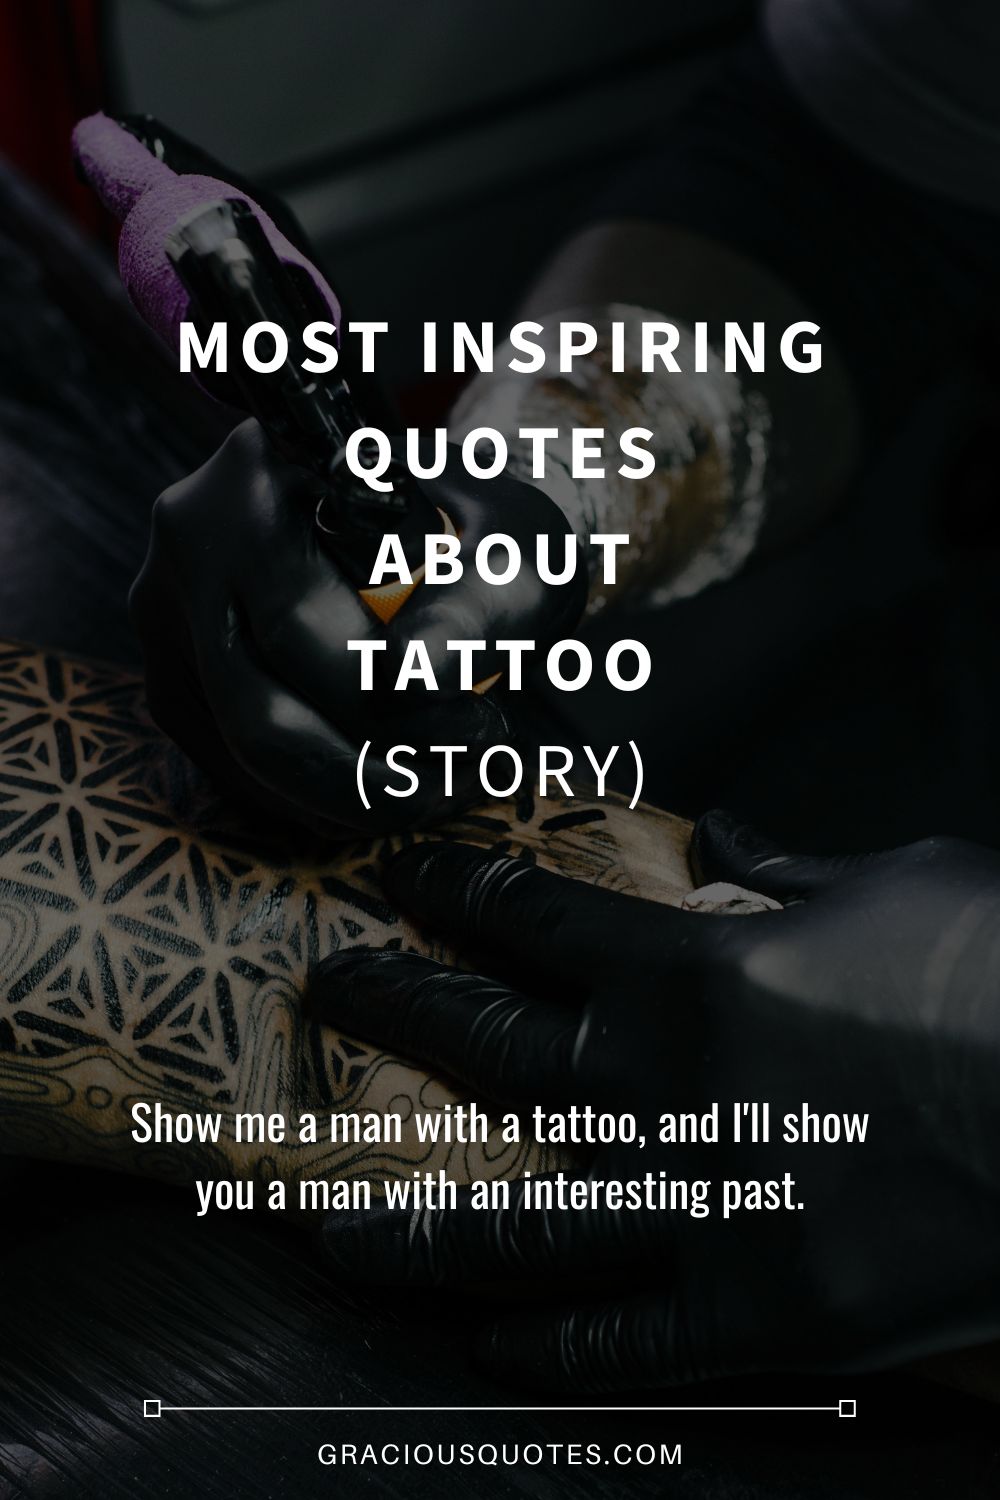 Tattoo Quotes - 101 Inspirational Tattoo Quotes to Inspire You, Guaranteed  - TattooViral.com | Your Number One source for daily Tattoo designs, Ideas  & Inspiration